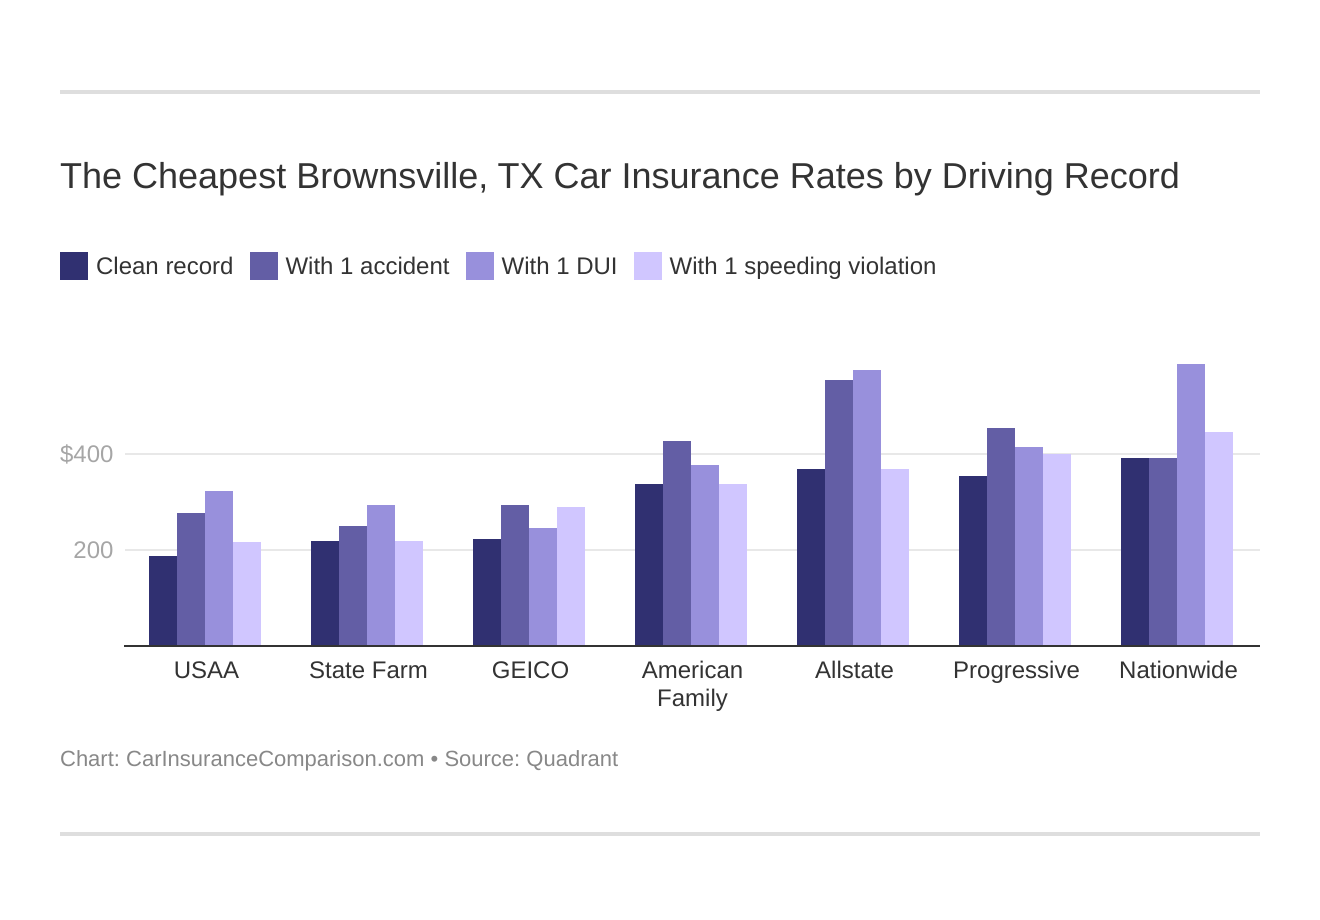 The Cheapest Brownsville, TX Car Insurance Rates by Driving Record